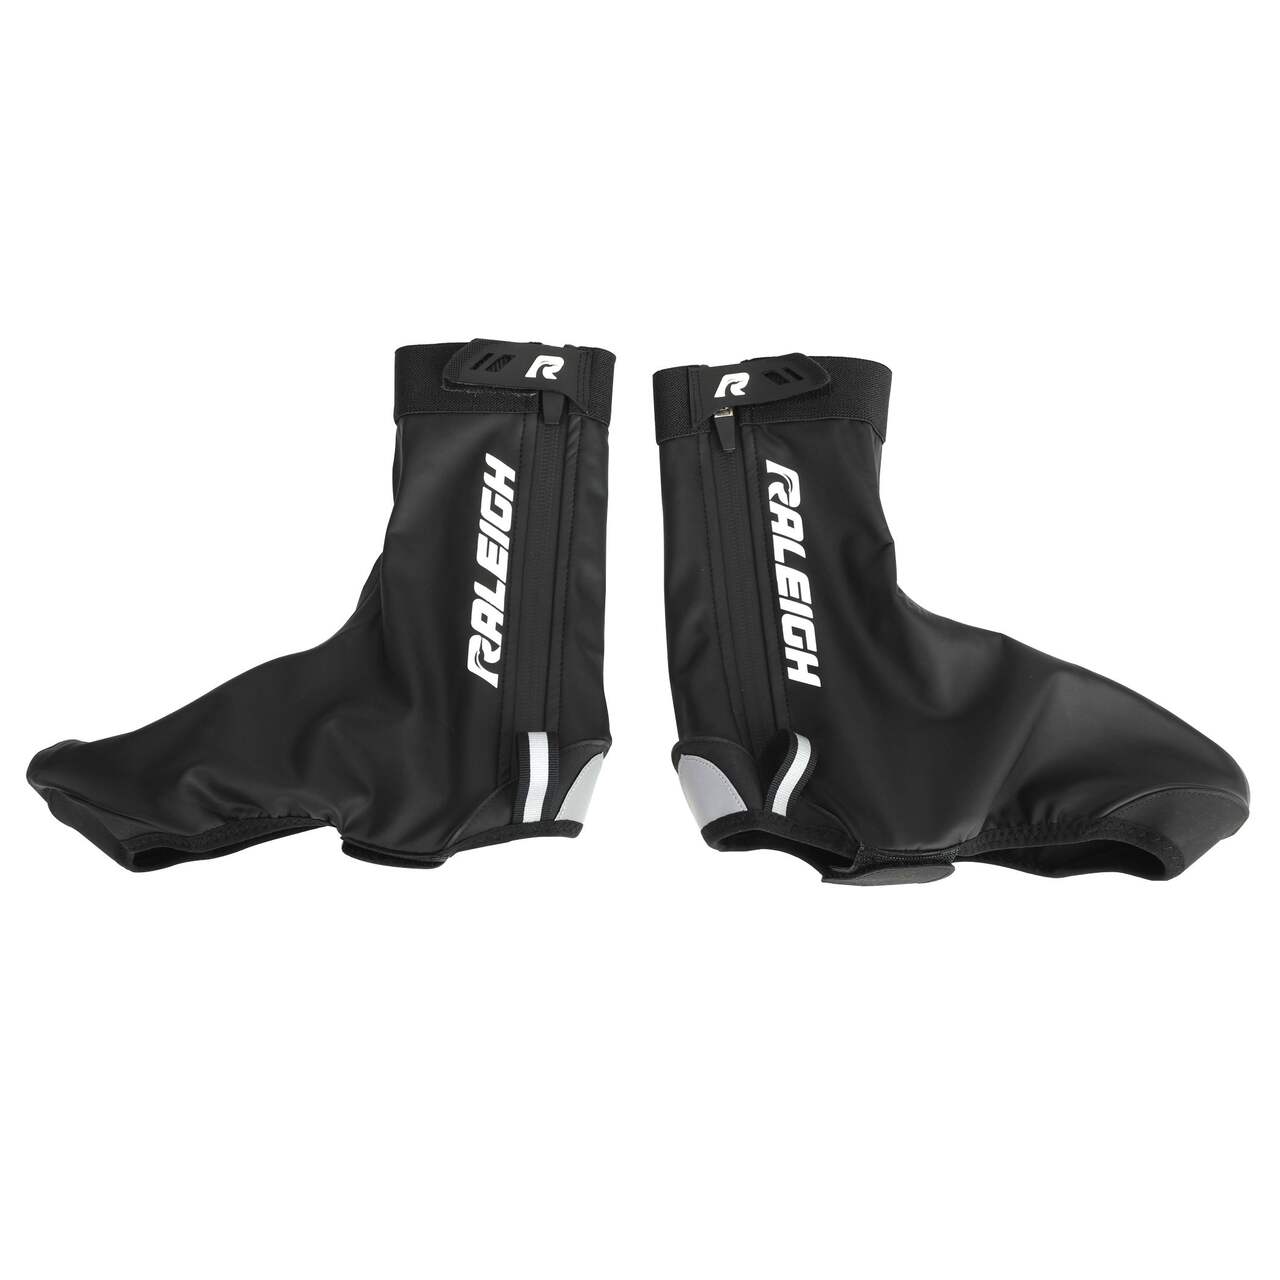 https://media-www.canadiantire.ca/product/playing/cycling/bicycle-accessories/0735217/raleigh-all-weather-bicycle-shoe-cover-757ee66e-a518-4368-993d-d50532d9b0e7-jpgrendition.jpg?imdensity=1&imwidth=640&impolicy=mZoom